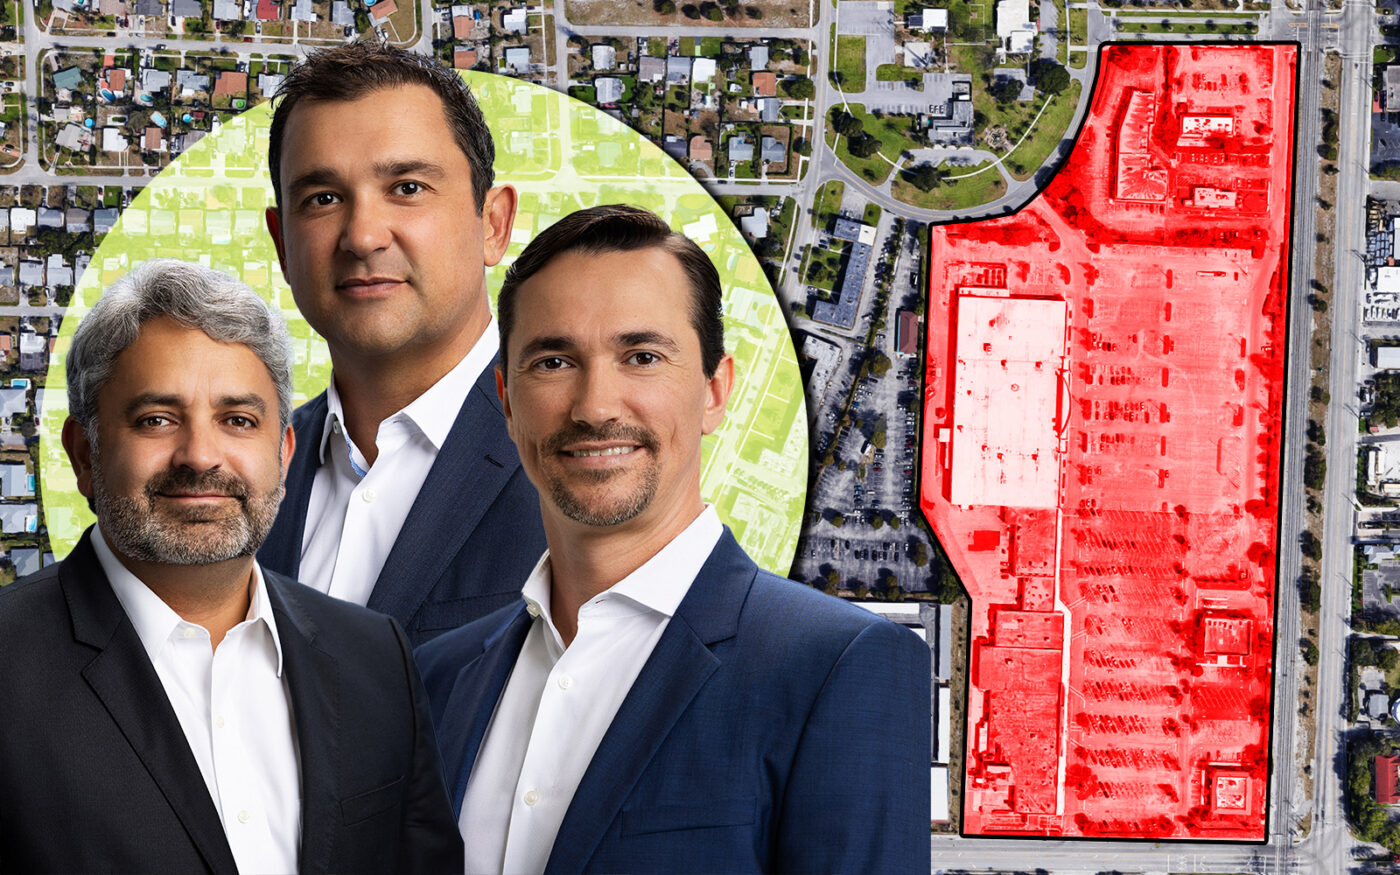 Integra Investments’ Paulo Tavares de Melo, Nelson Stabile and Victor Ballestas and Lantana Village Square at 1201 and 1301 S. Dixie Highway and 457 Greynolds Circle